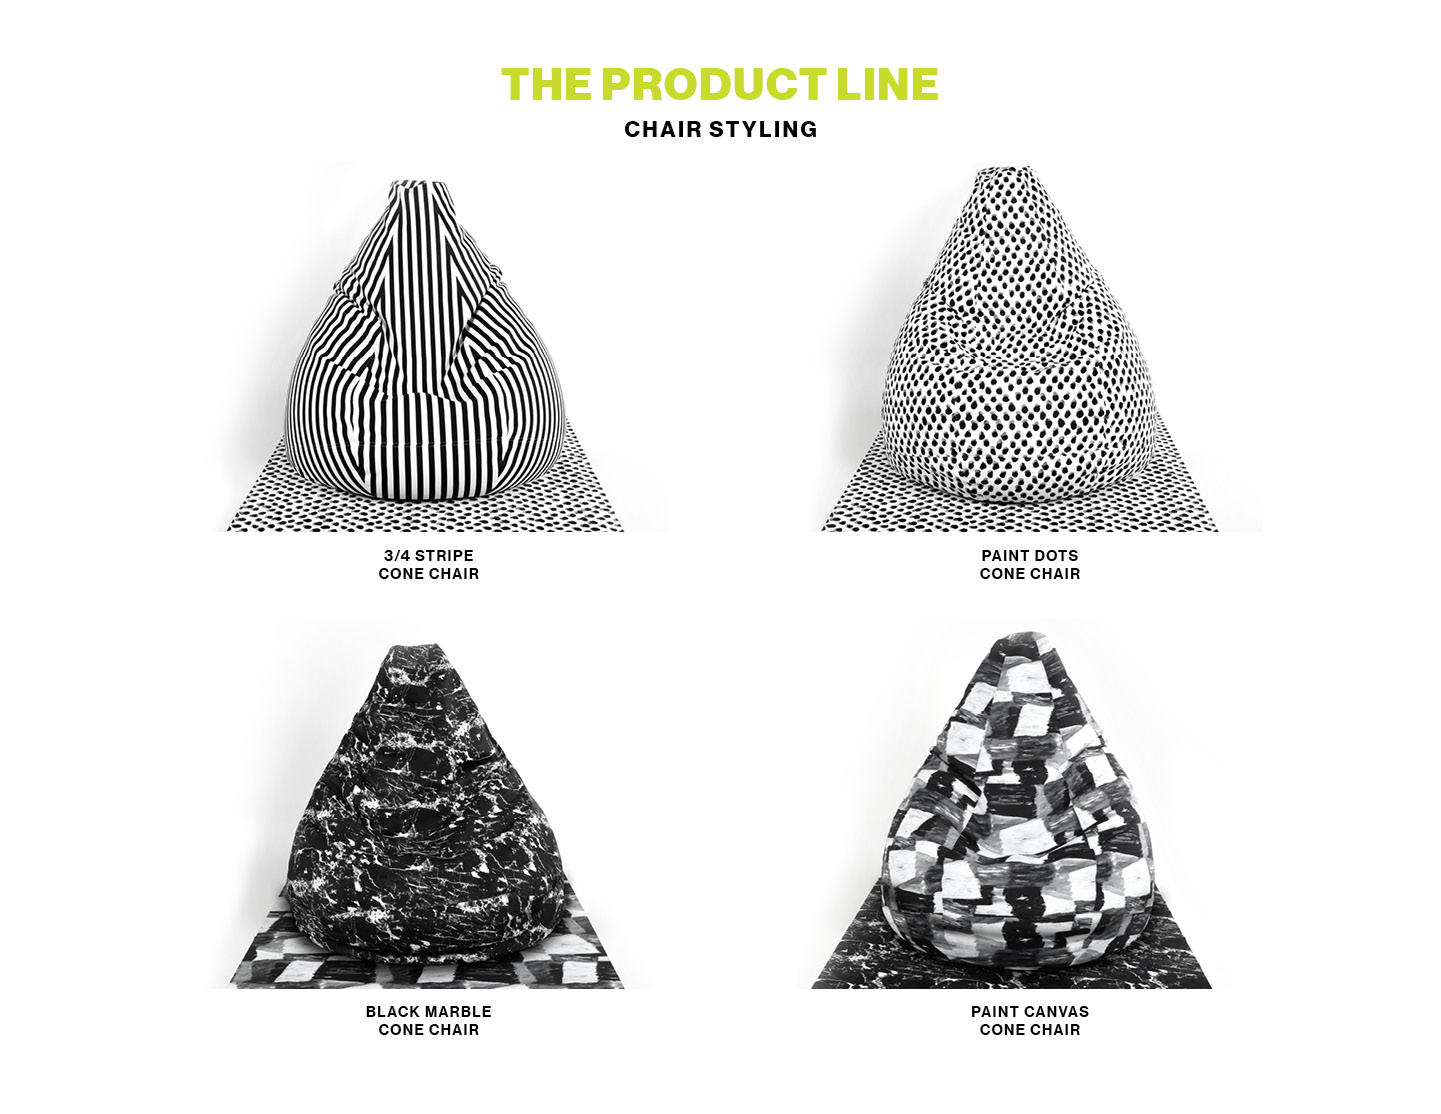 The Cone Chair product line